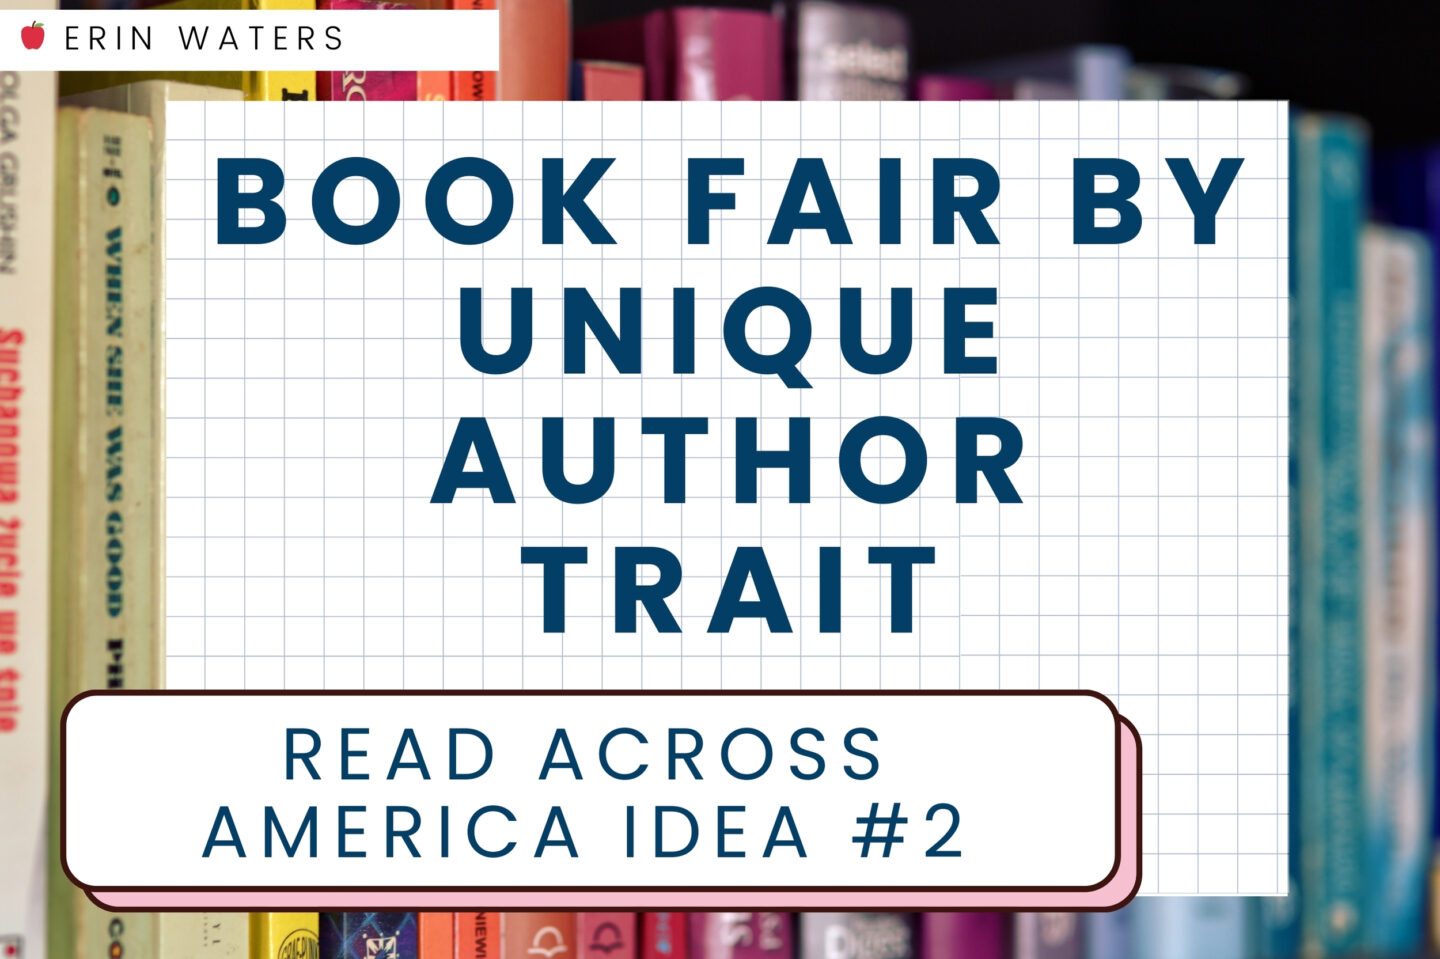 Read Across America activities idea #2: Book fair organized by unique author trait - graph paper with navy text on top against a background of multi-colored book spines.